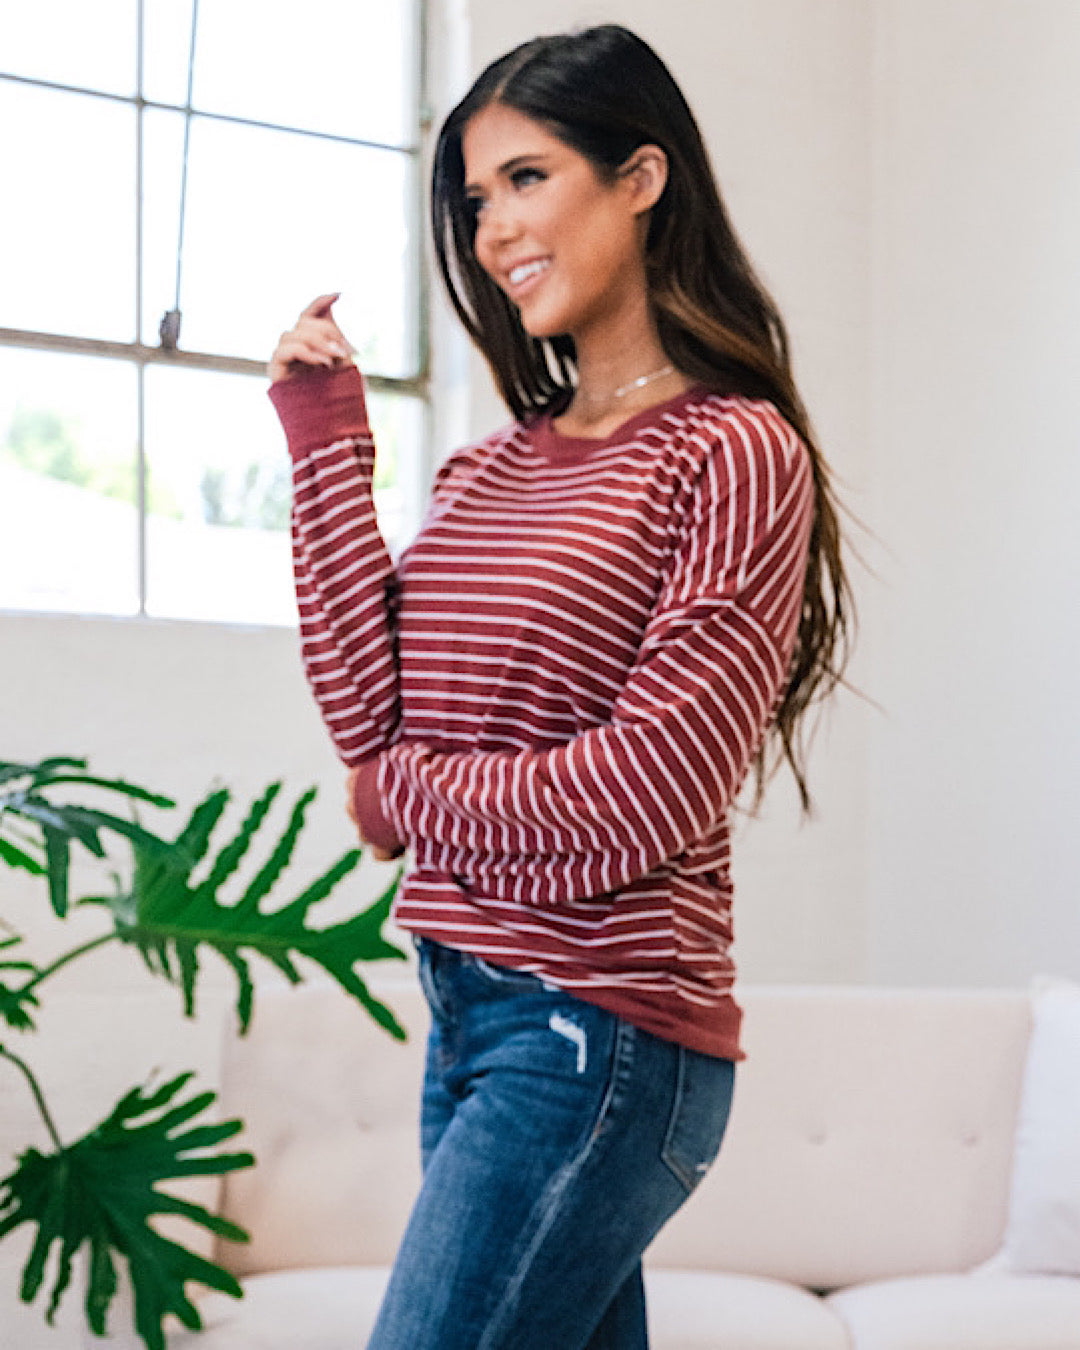 NEW! Believe It Brick Striped Drop Shoulder Top  Staccato   